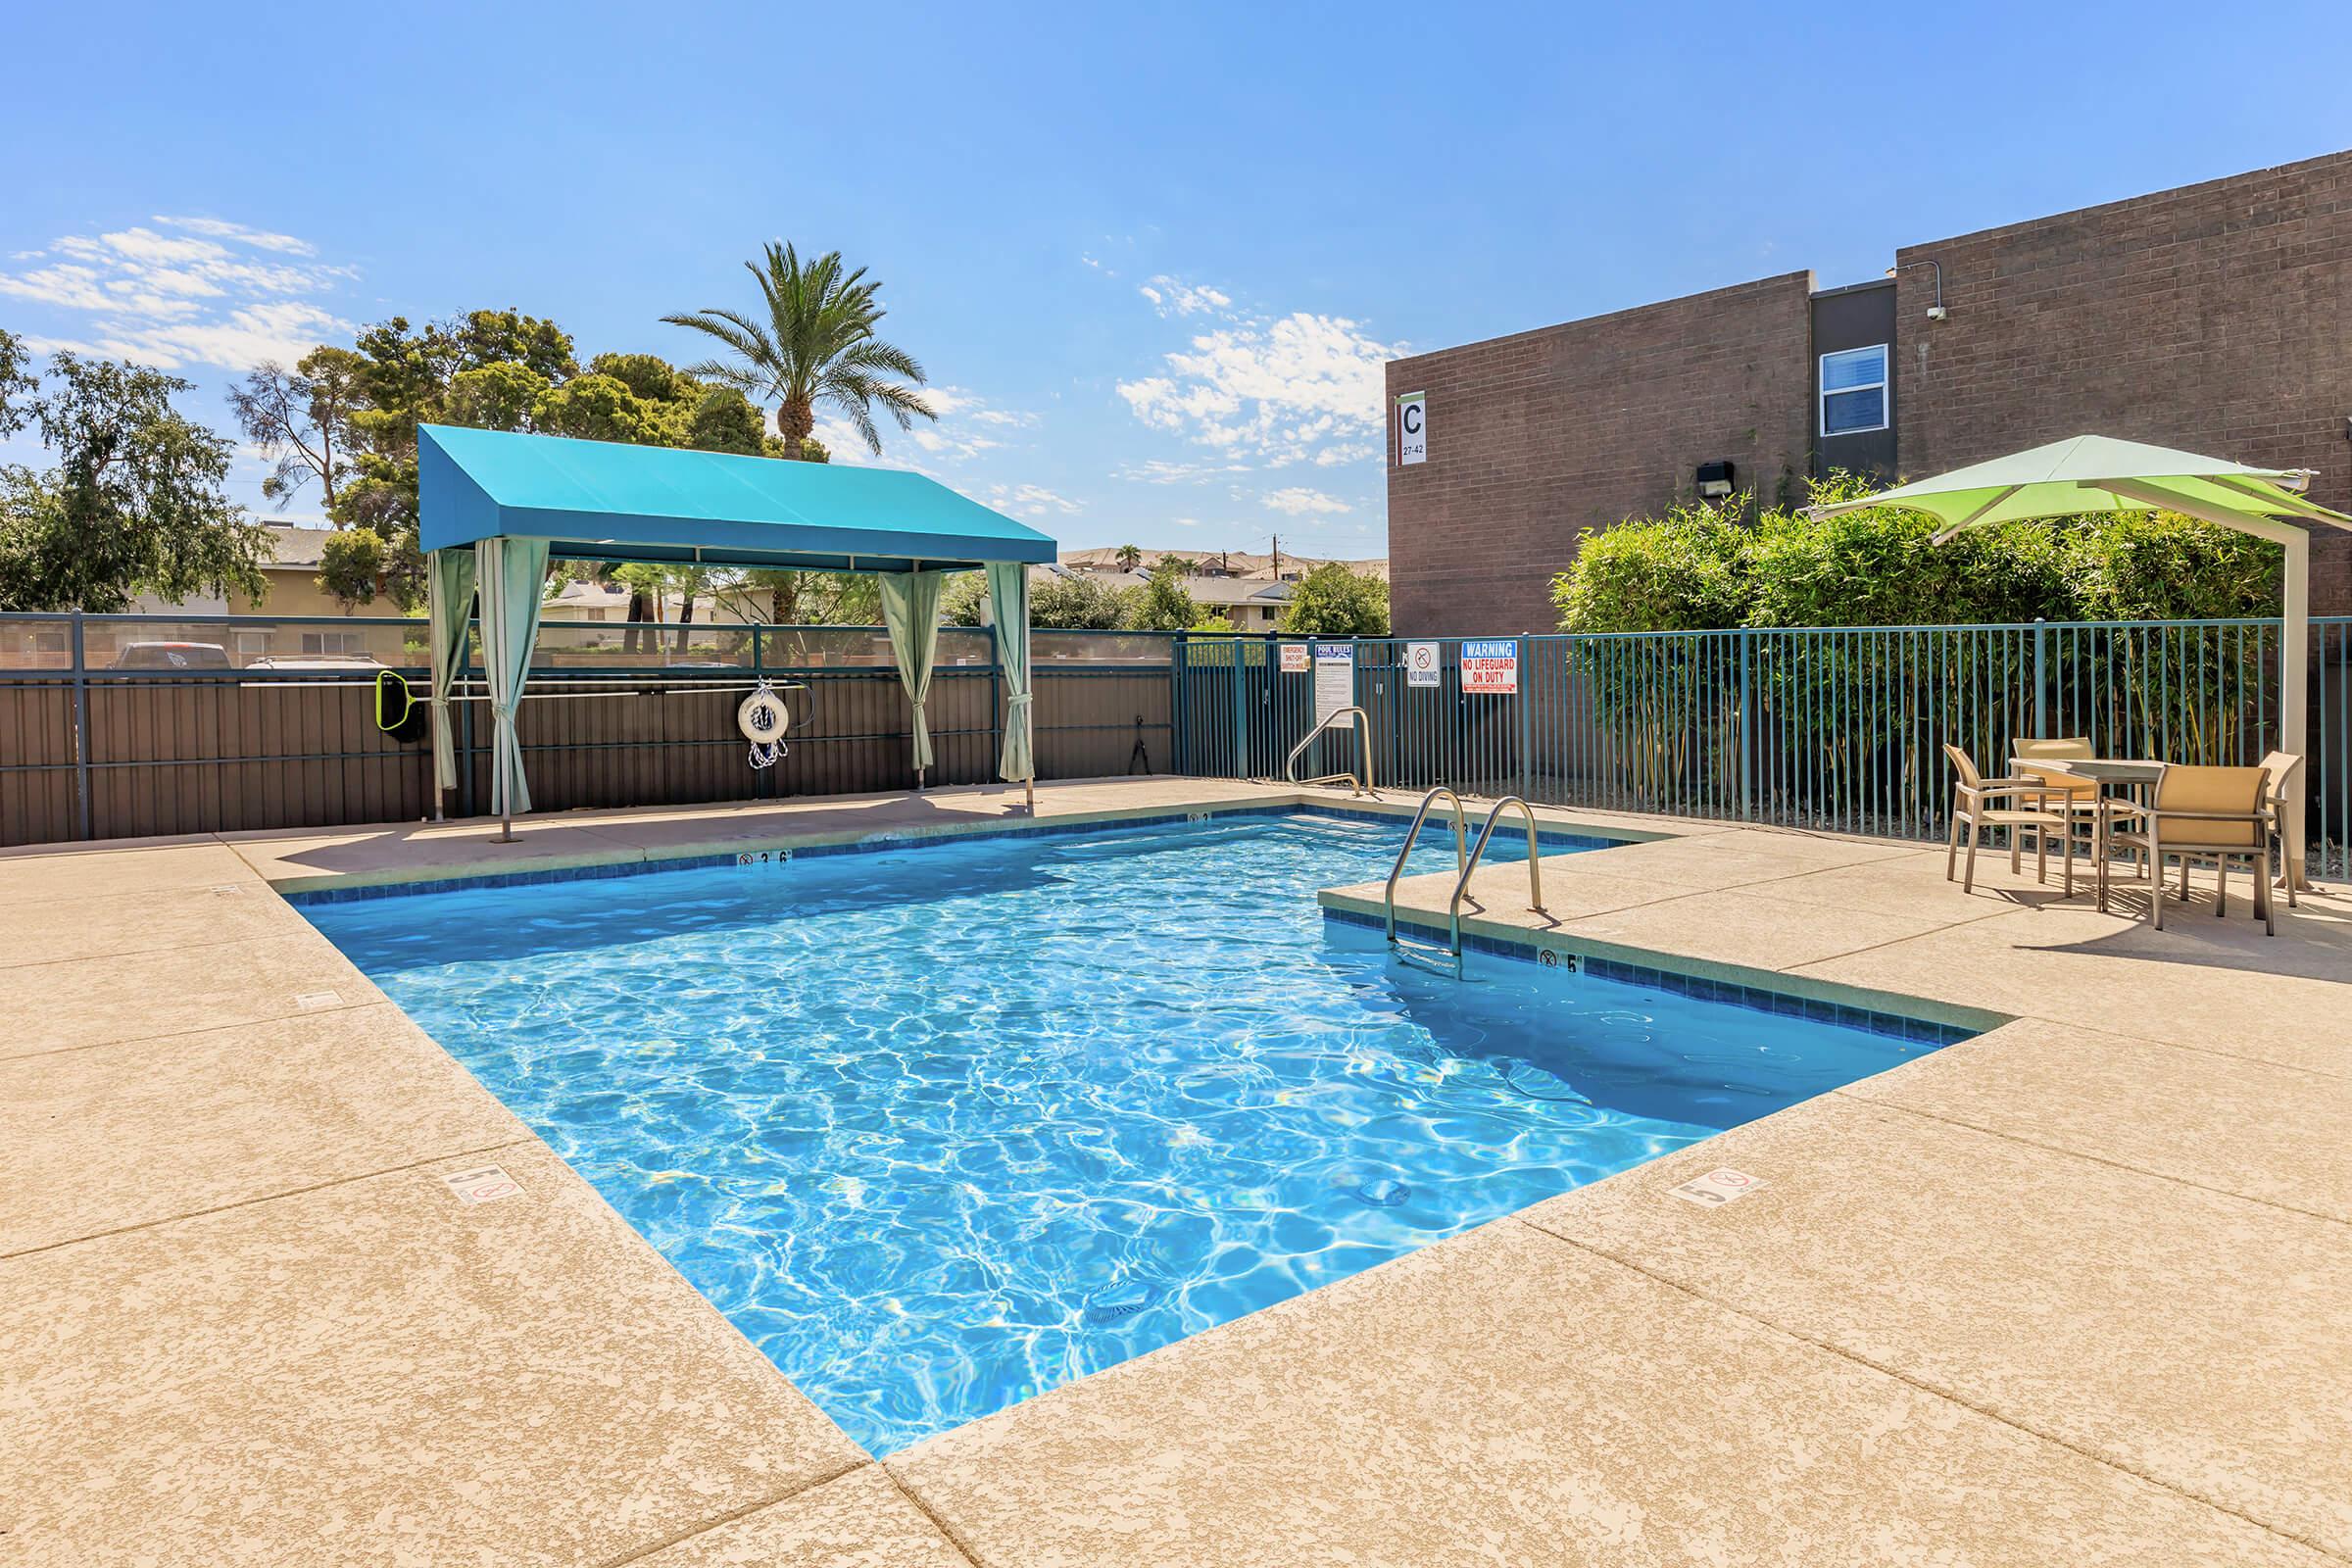 MAKE WAVES IN OUR SHIMMING SWIMMING POOL